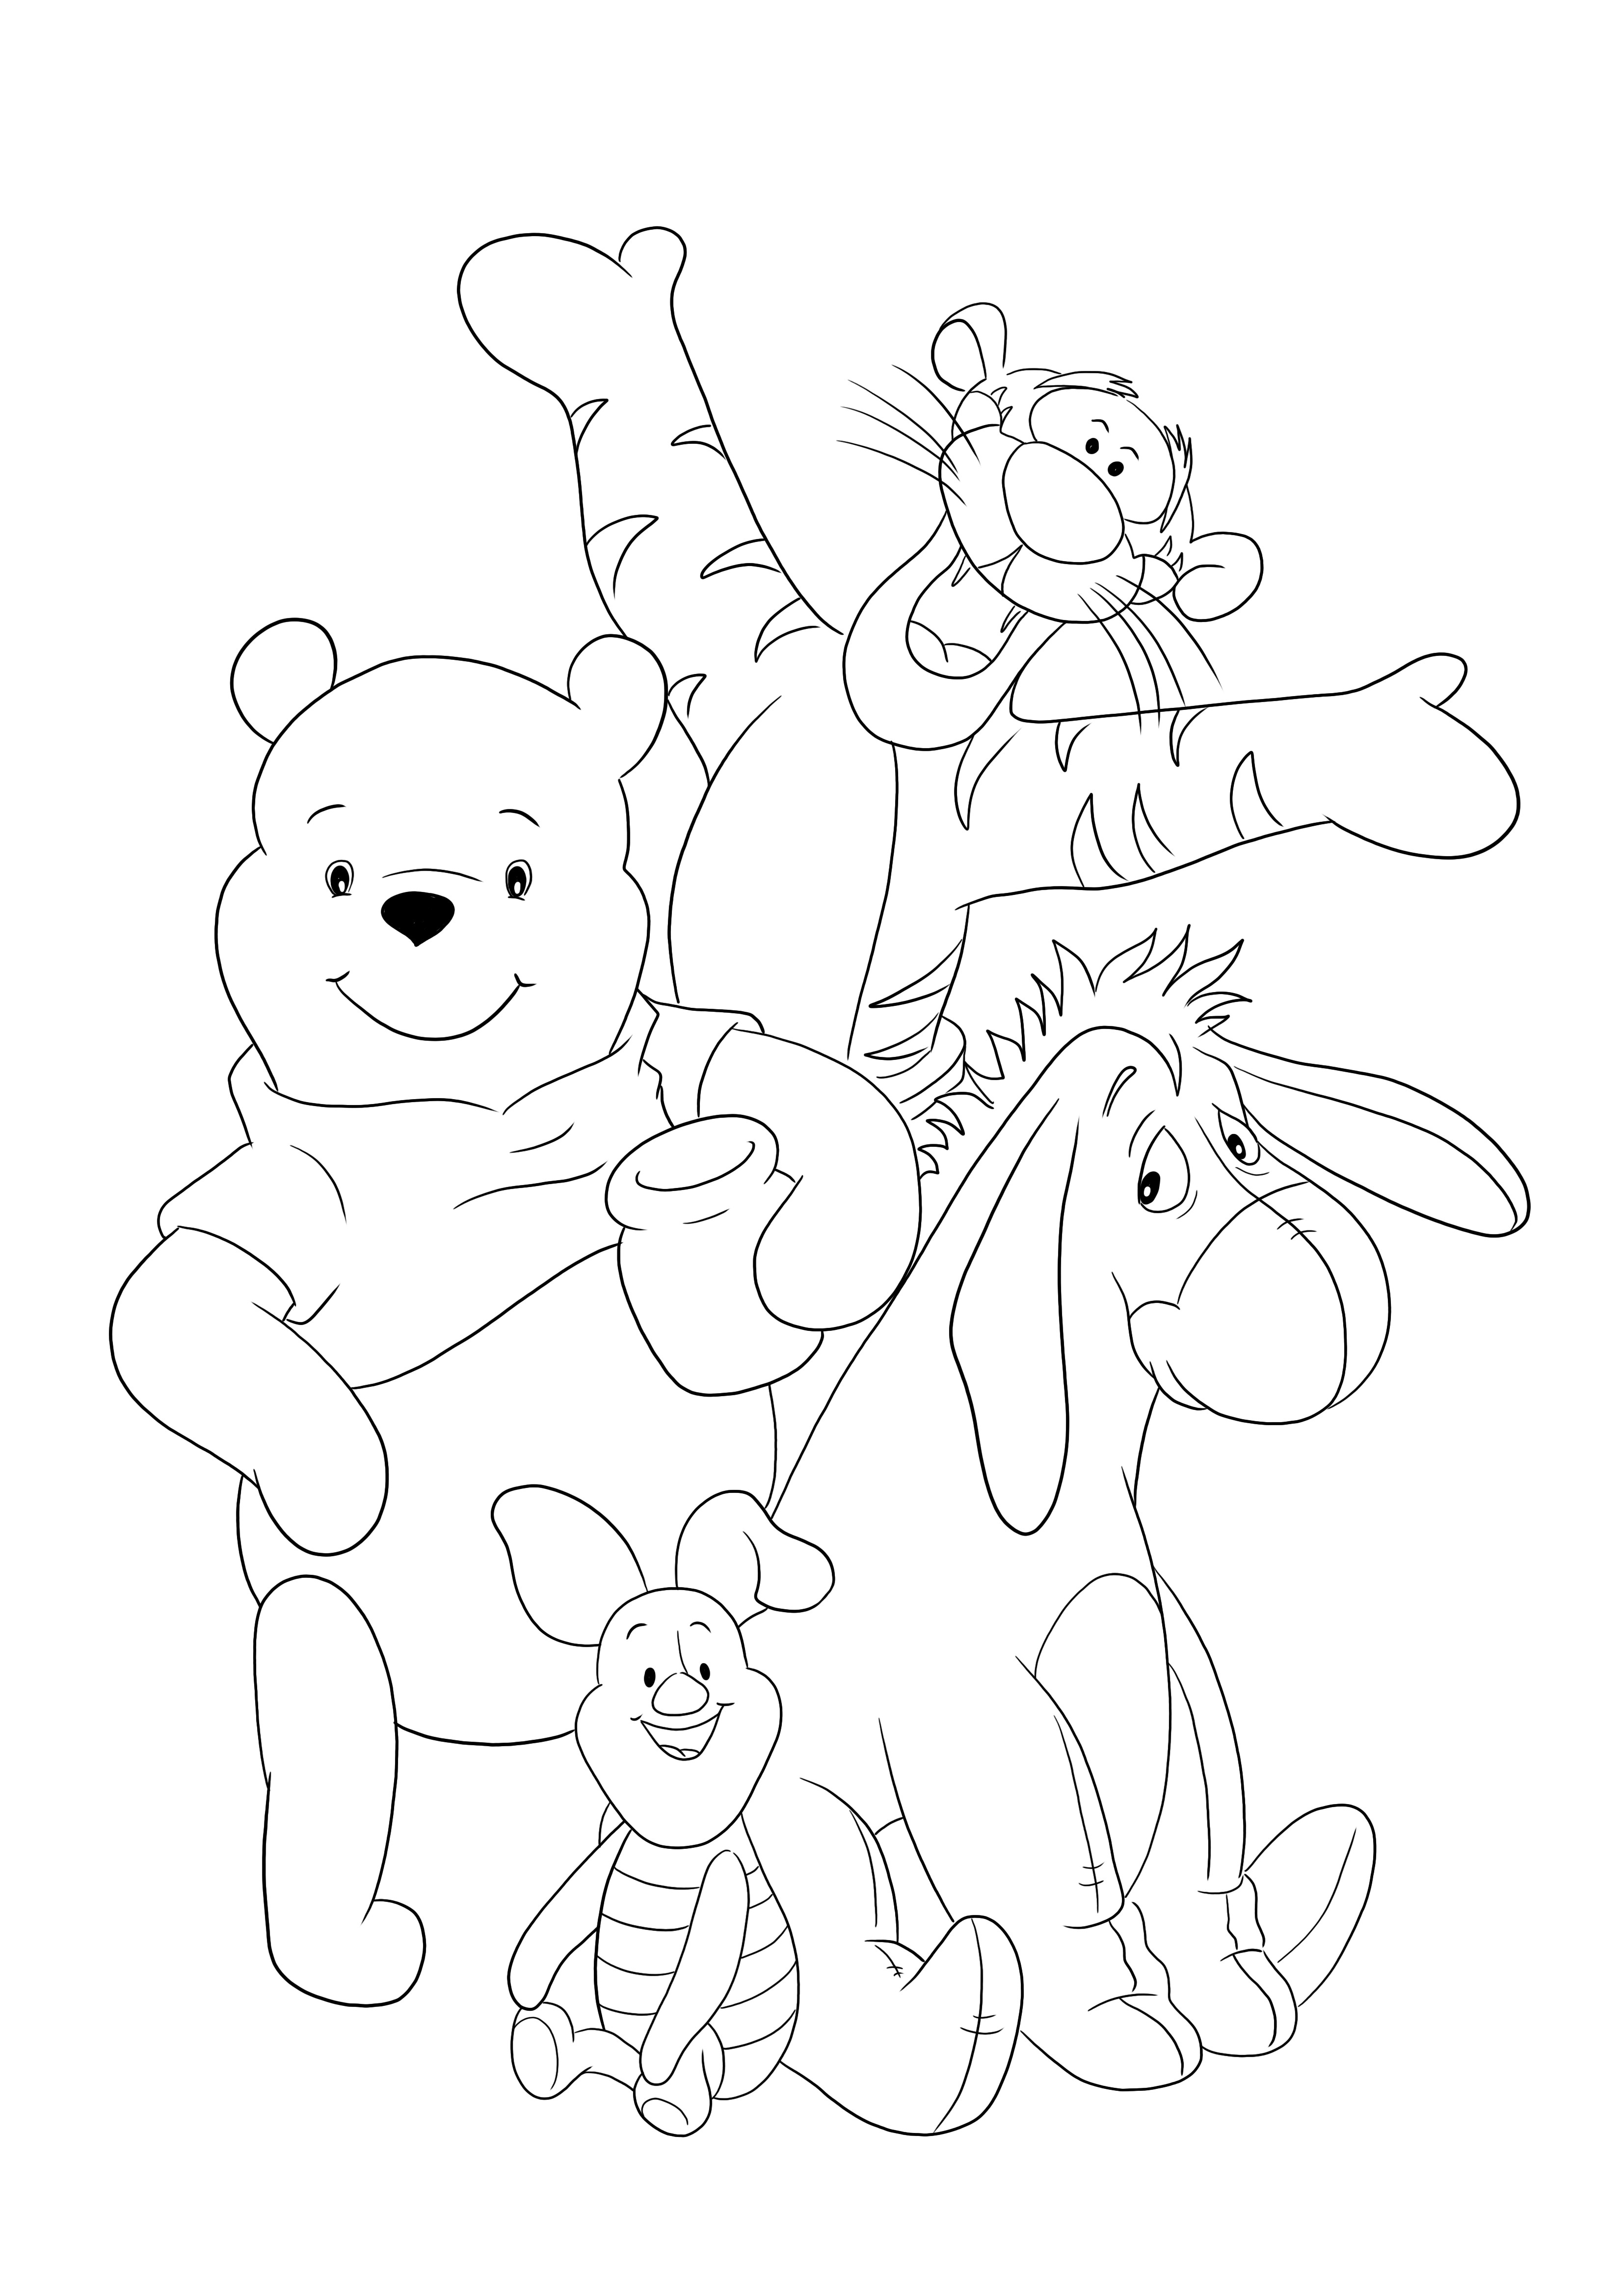 Here is our happy Winnie and his friends free printable for coloring easily